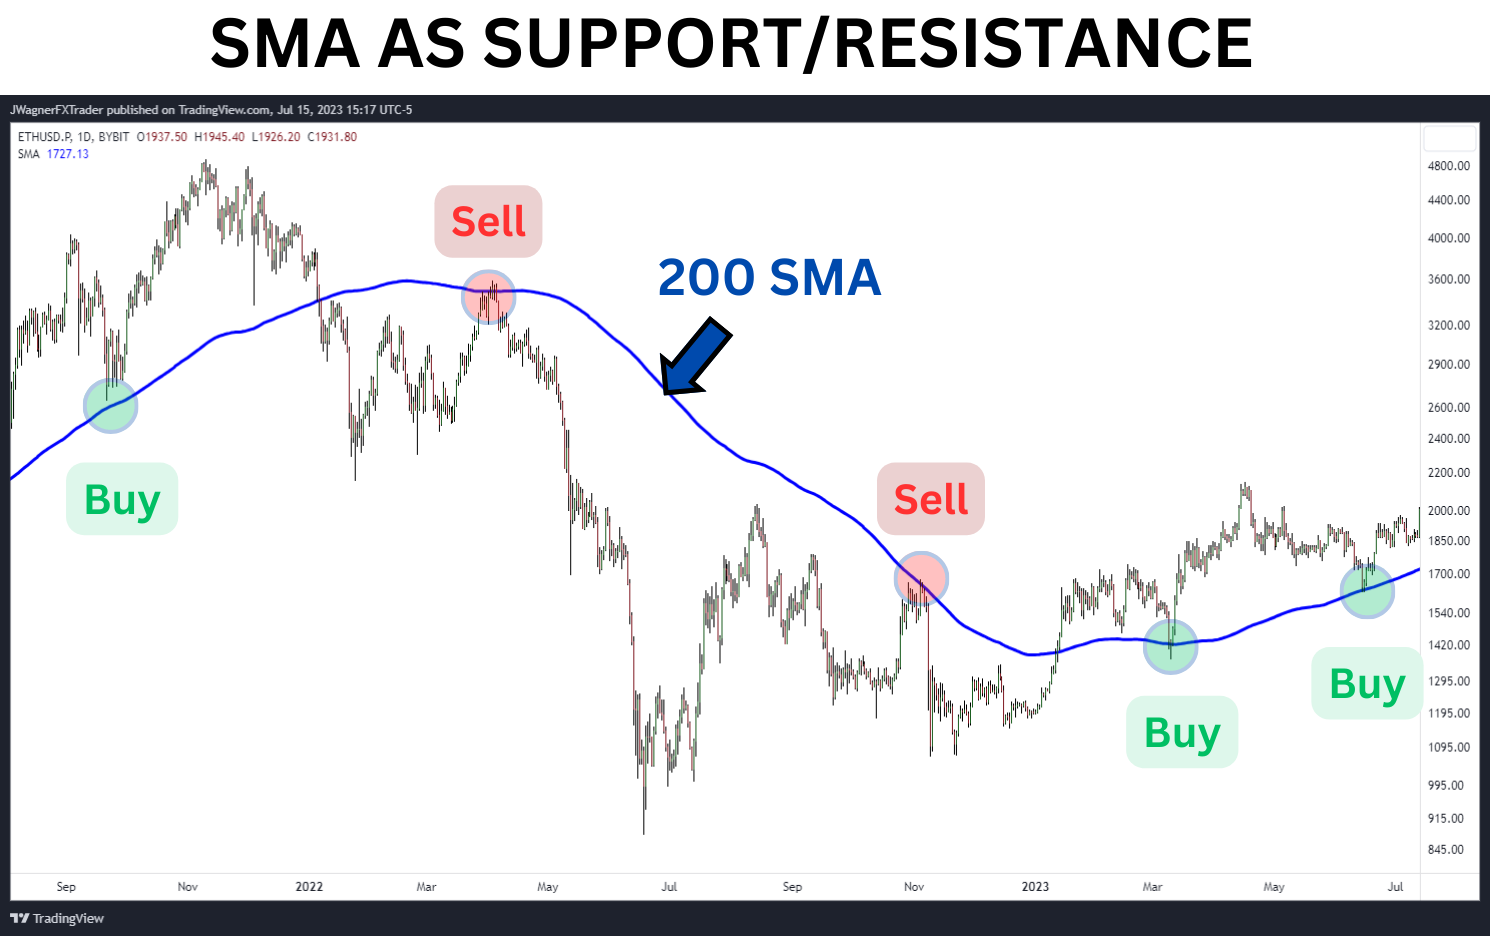 200-period SMA as support/resistance level.